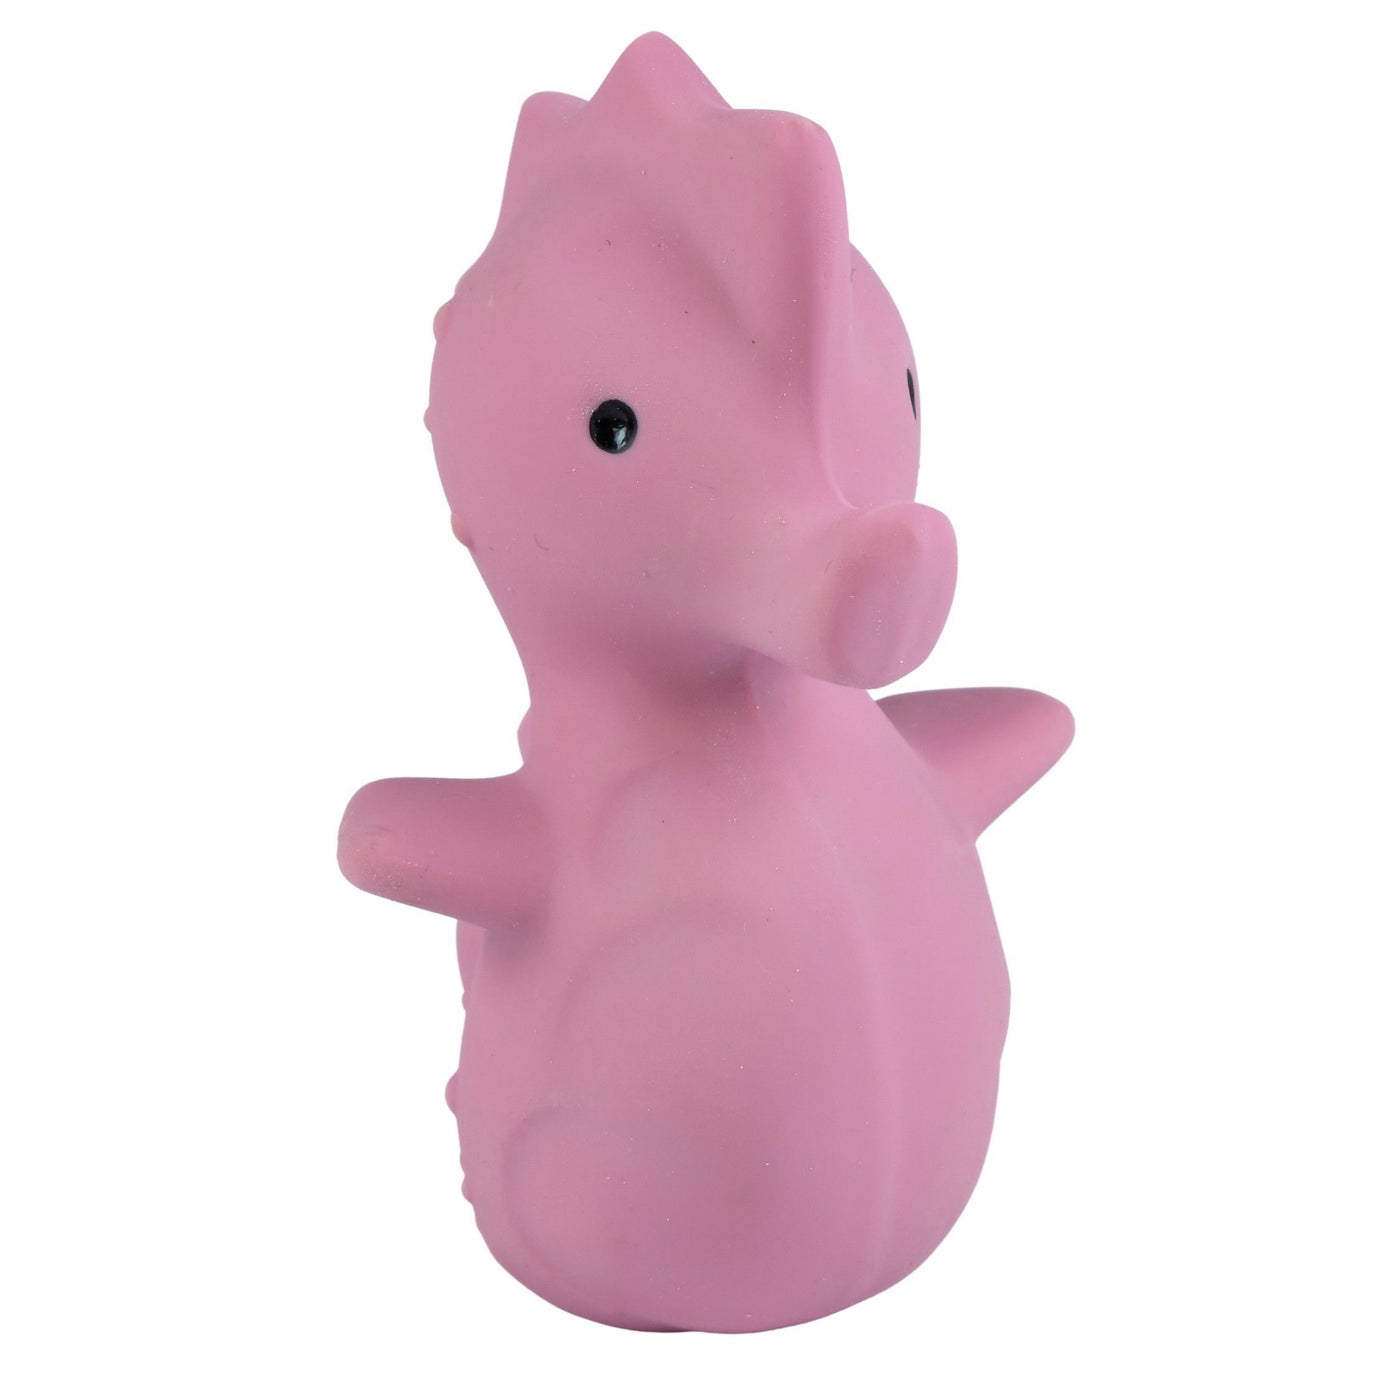 SEA HORSE - Organic Natural Rubber Teether, Rattle & Bath Toy